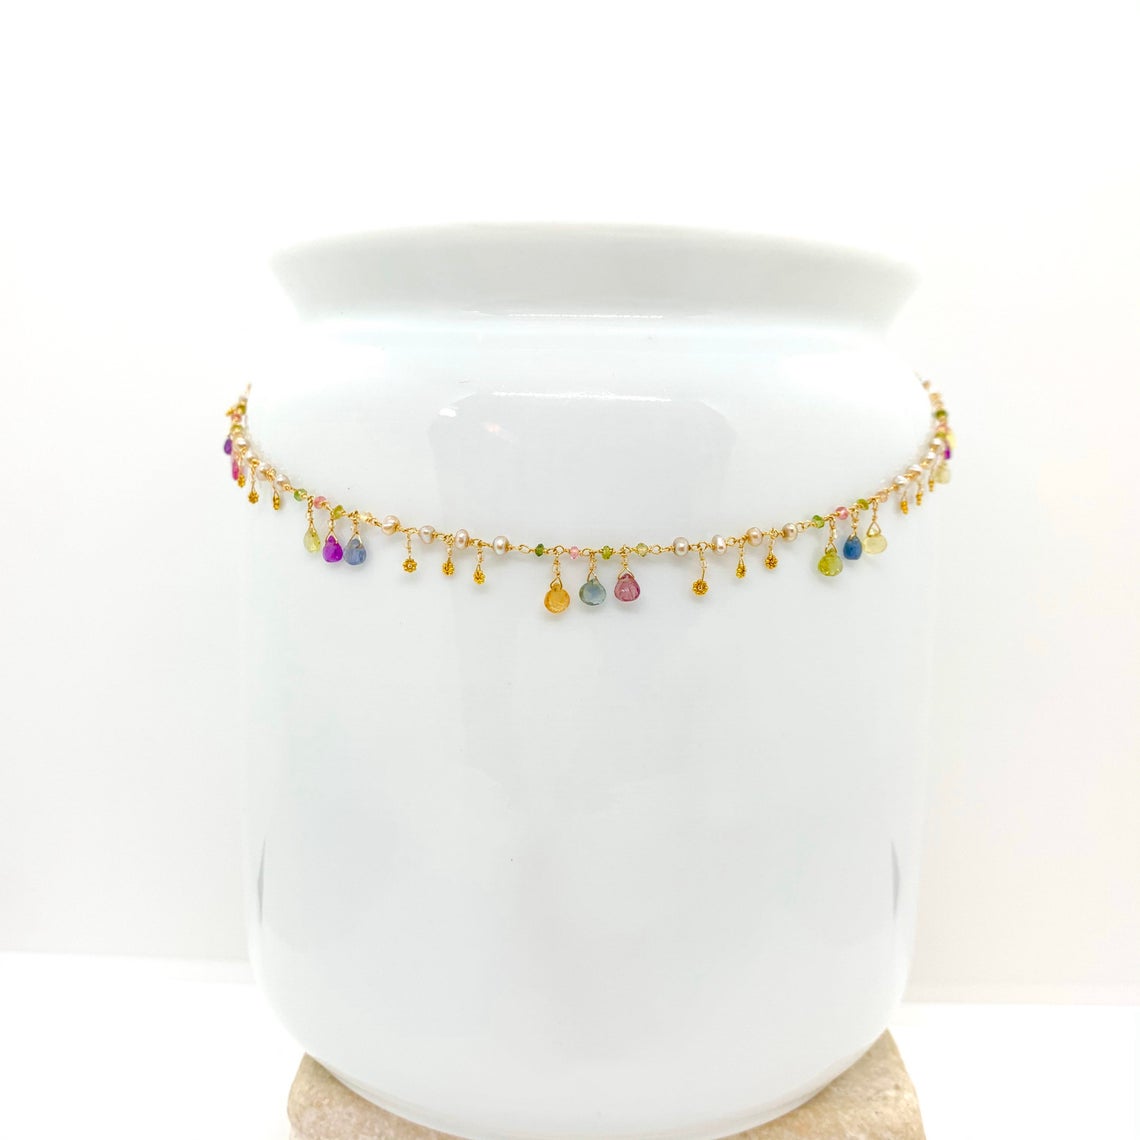 14K GOLD SAPPHIRE NECKLACE - Italian Gold Necklace – Sapphires, Tourmaline Necklace - 18k Gold Daisies - Freshwater Pearls